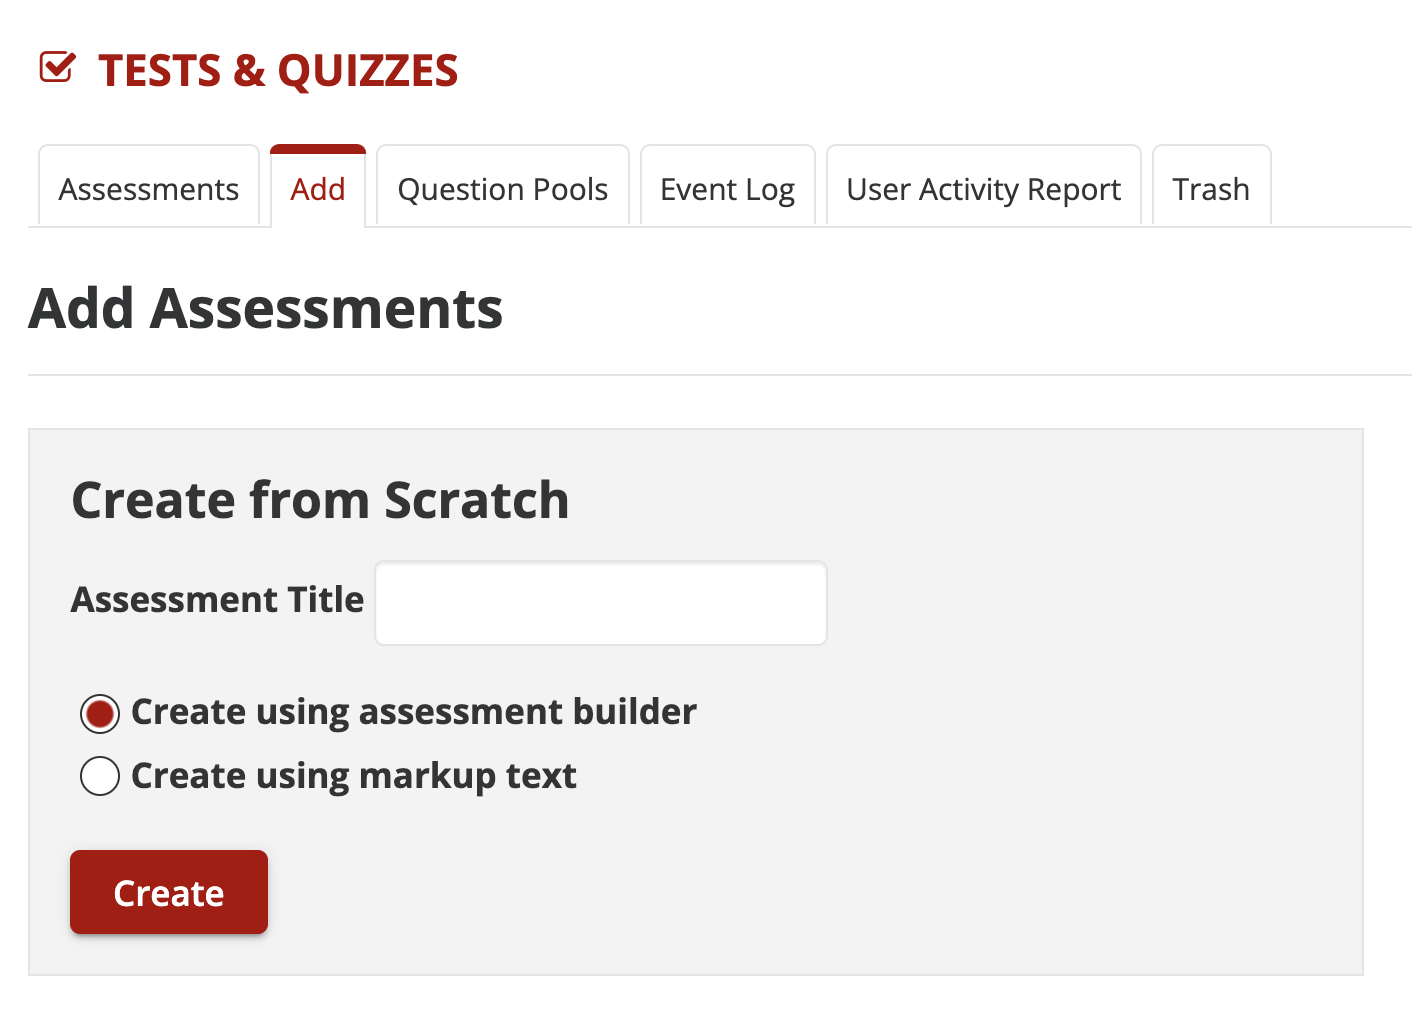 Creating a test and quiz assessment 